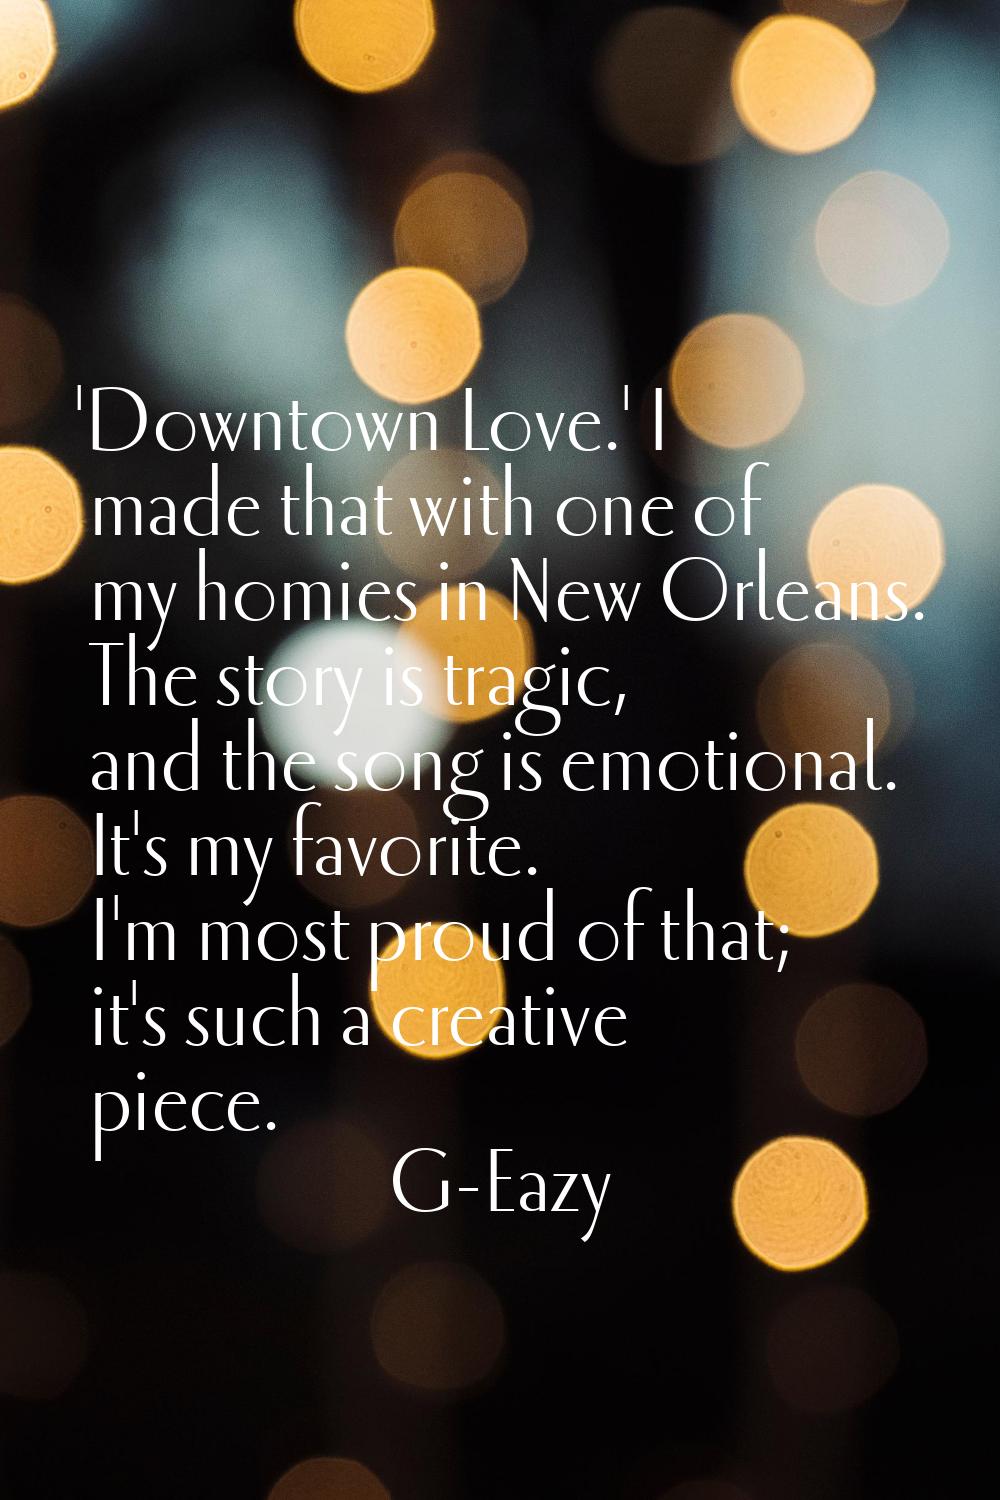 'Downtown Love.' I made that with one of my homies in New Orleans. The story is tragic, and the son